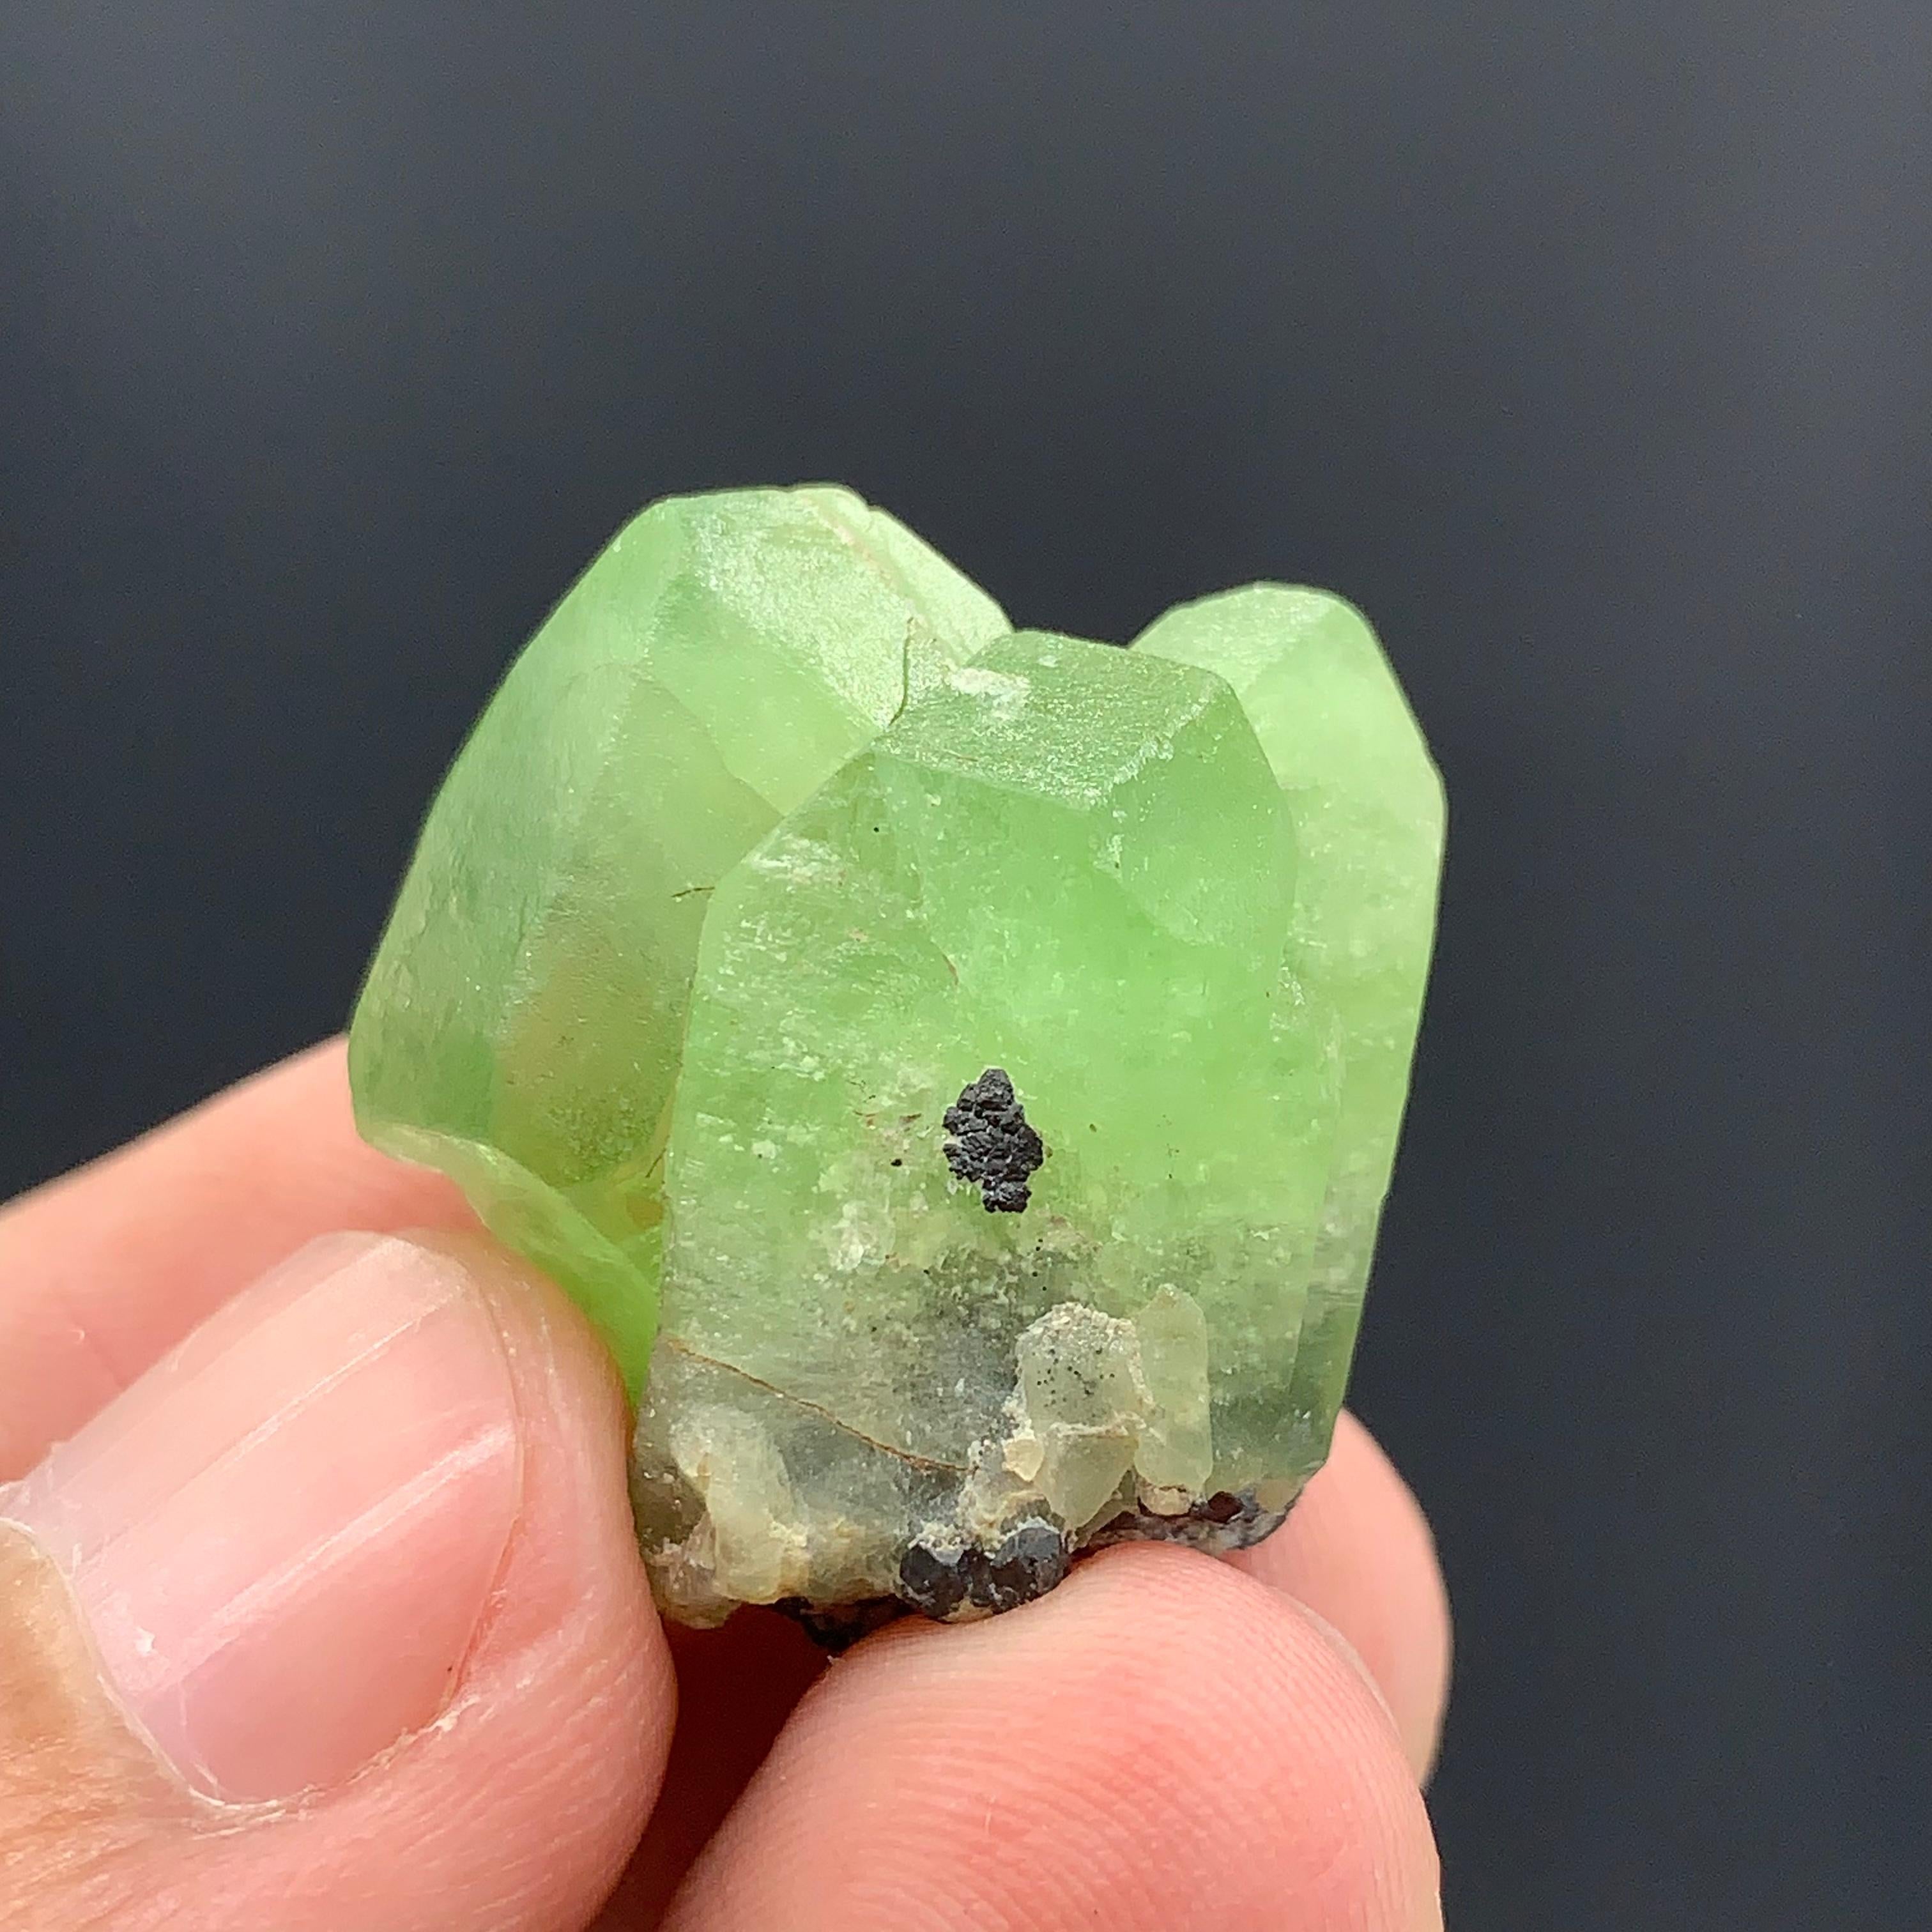 Adorable Peridot Specimen From Mansehra, KPK Province, Pakistan
Weight: 68.60 Carat
Dimension : 2.4 x 2.3 x 1.7 Cm
Origin : Mansehra District, Khyber Pukhtunkhuwa, Pakistan

Peridot is a popular stone for protection against difficulties and